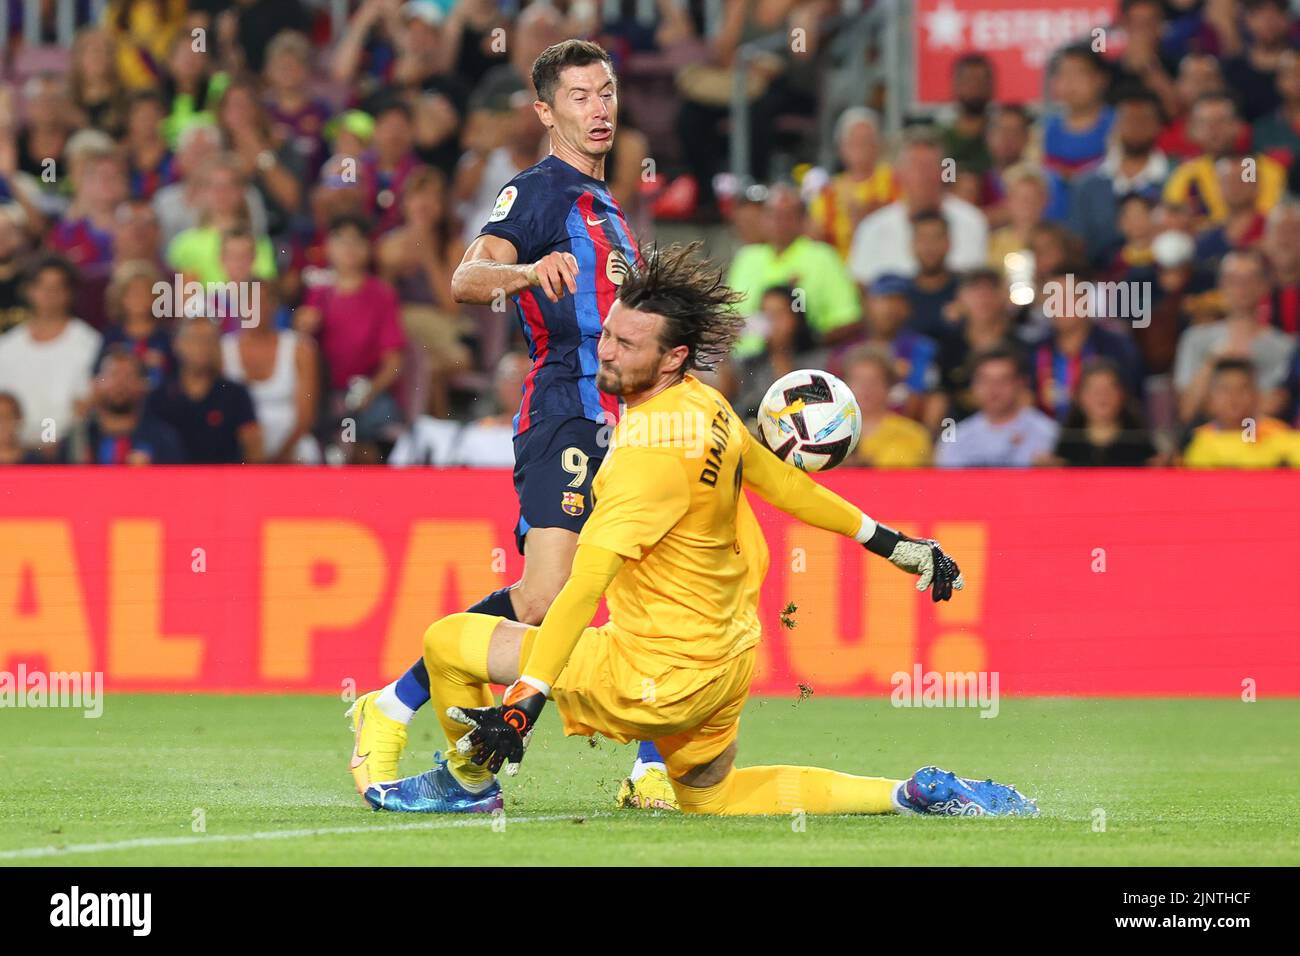 Robert Lewandowski of FC Barcelona in action with Stole Dimitrievski of Rayo Vallecano during the Liga match between FC Barcelona and Rayo Vallecano at Spotify Camp Nou in Barcelona, Spain. Stock Photo